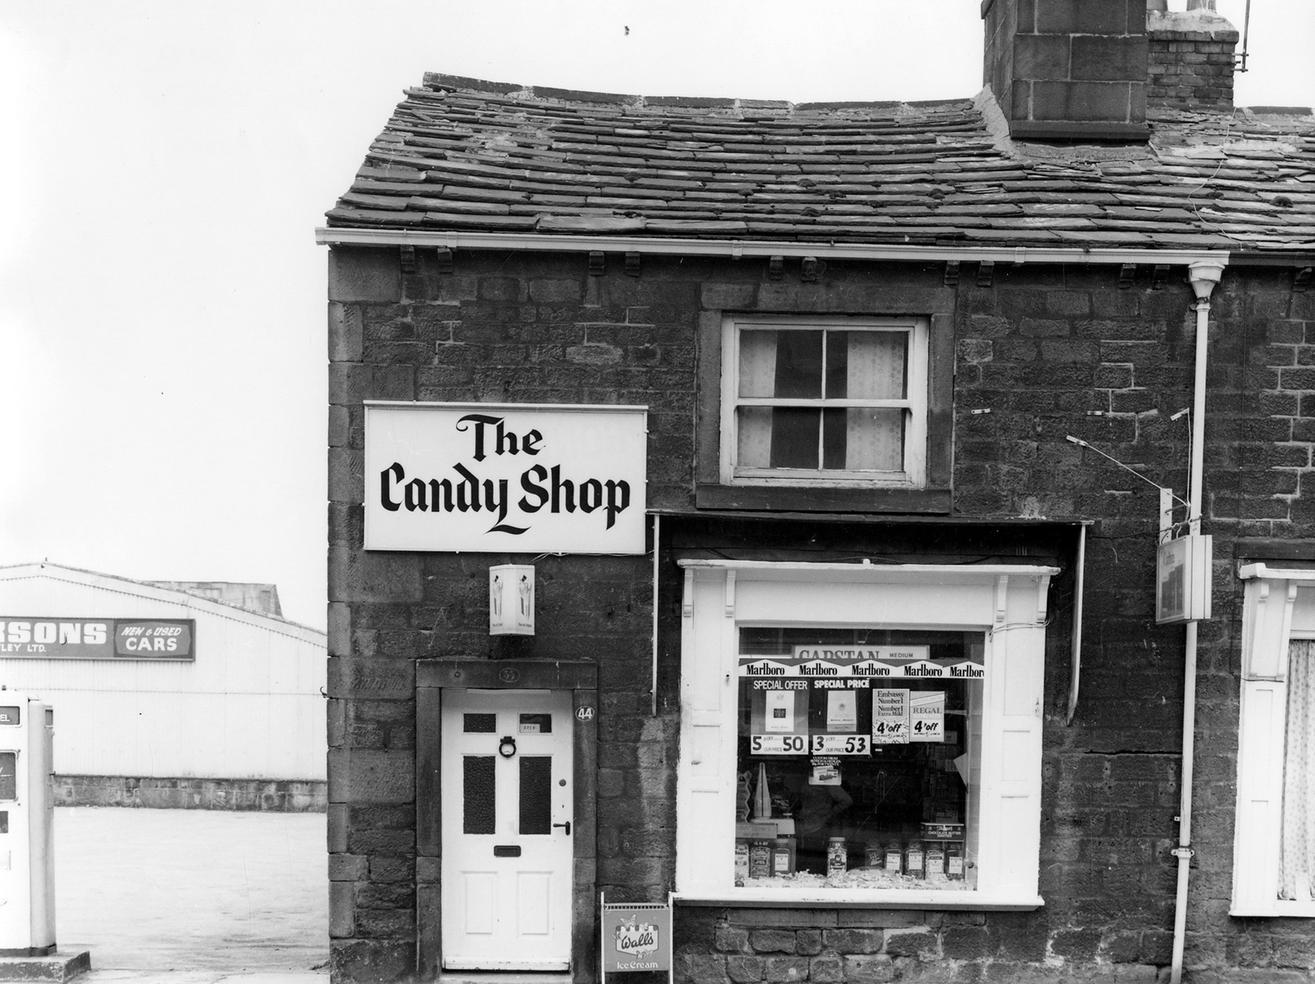 The Candy Shop, sweets and tobacco, on Boroughgate. On the left is Jackson's garage and car showroom.